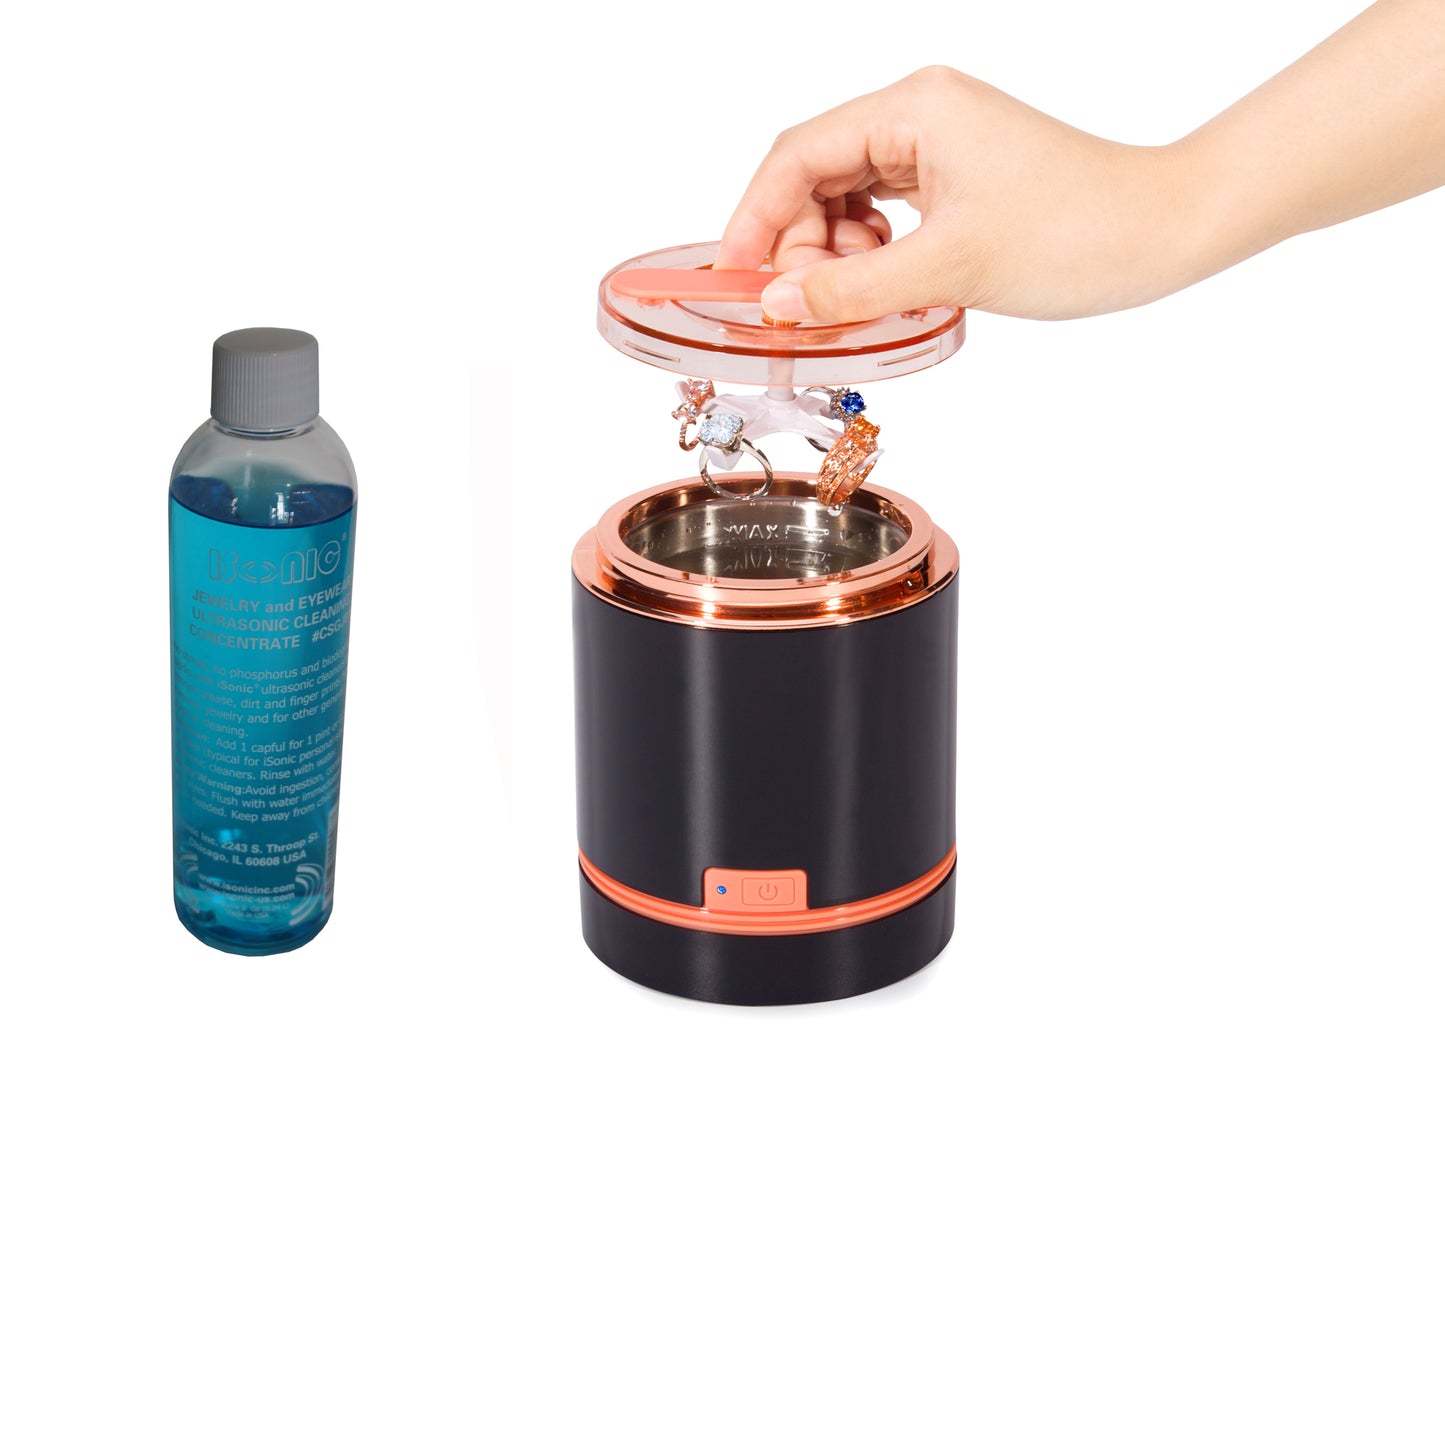 Good Vibrations Concentrated Ultrasonic Cleaner Solution